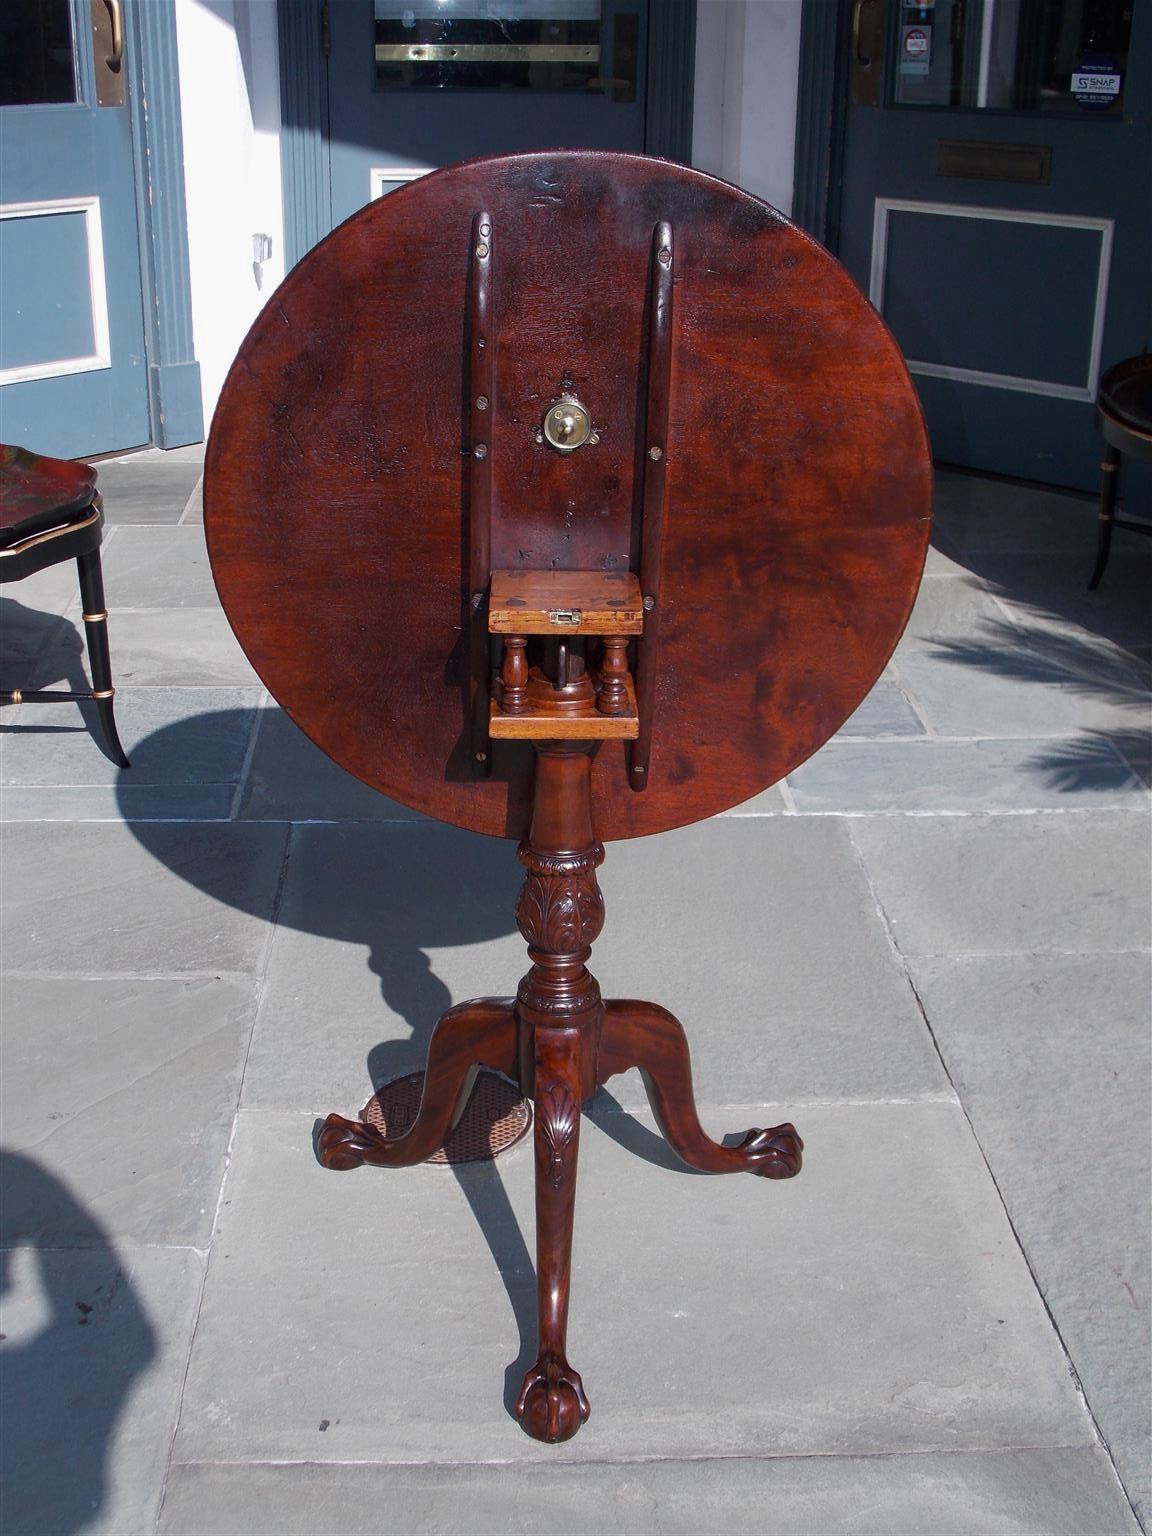 Irish Plum Pudding Mahogany Tilt-Top Acanthus Tea Table with Birdcage Circa 1770 In Excellent Condition For Sale In Hollywood, SC